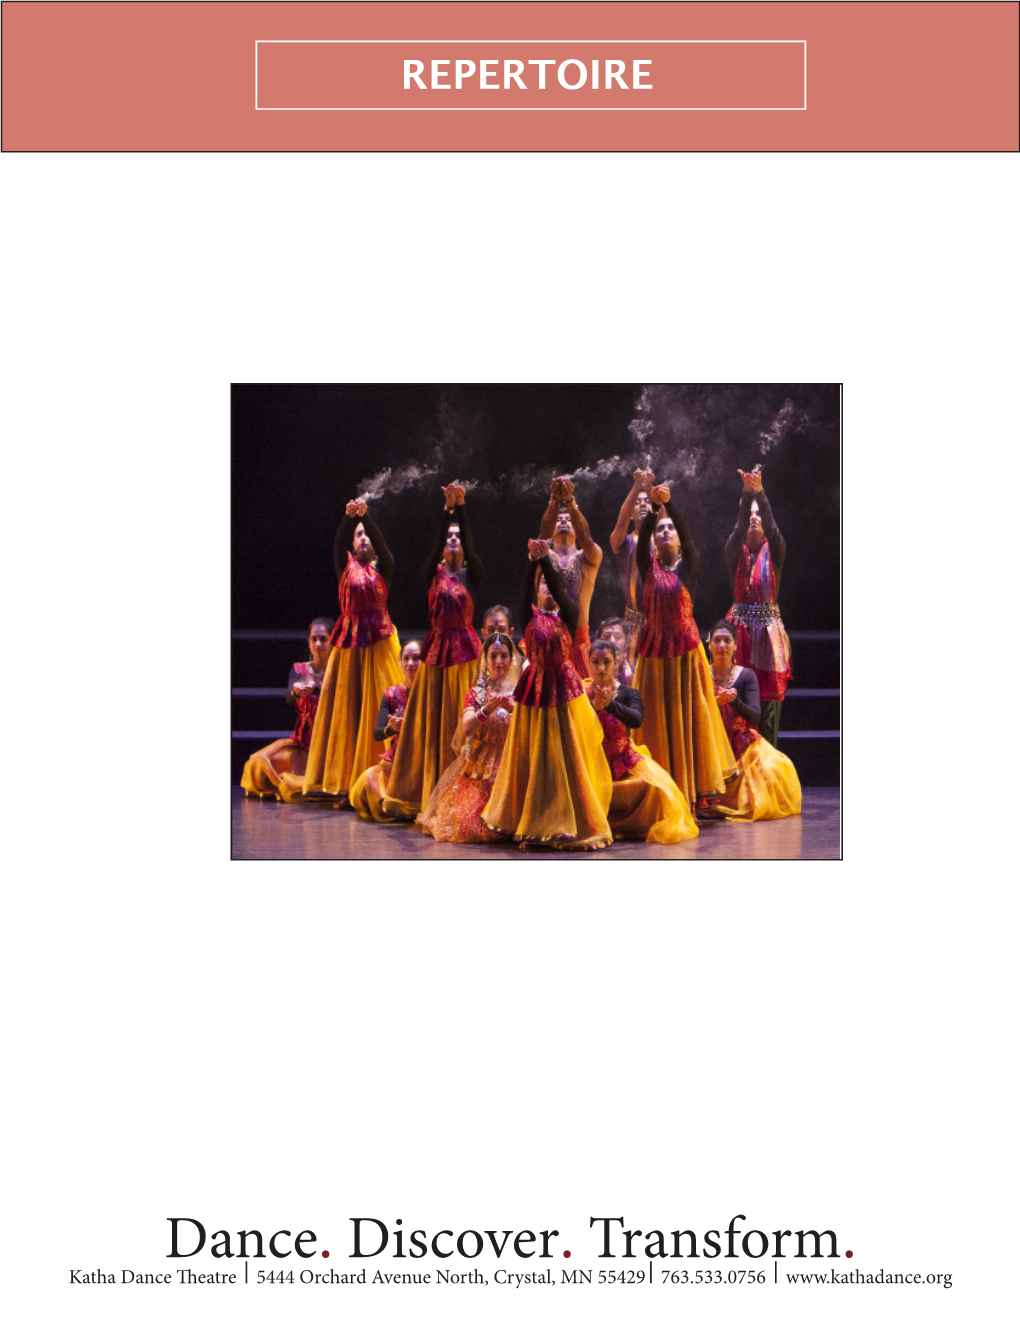 Dance. Discover. Transform. Katha Dance Theatre 5444 Orchard Avenue North, Crystal, MN 55429 763.533.0756 REPERTOIRE